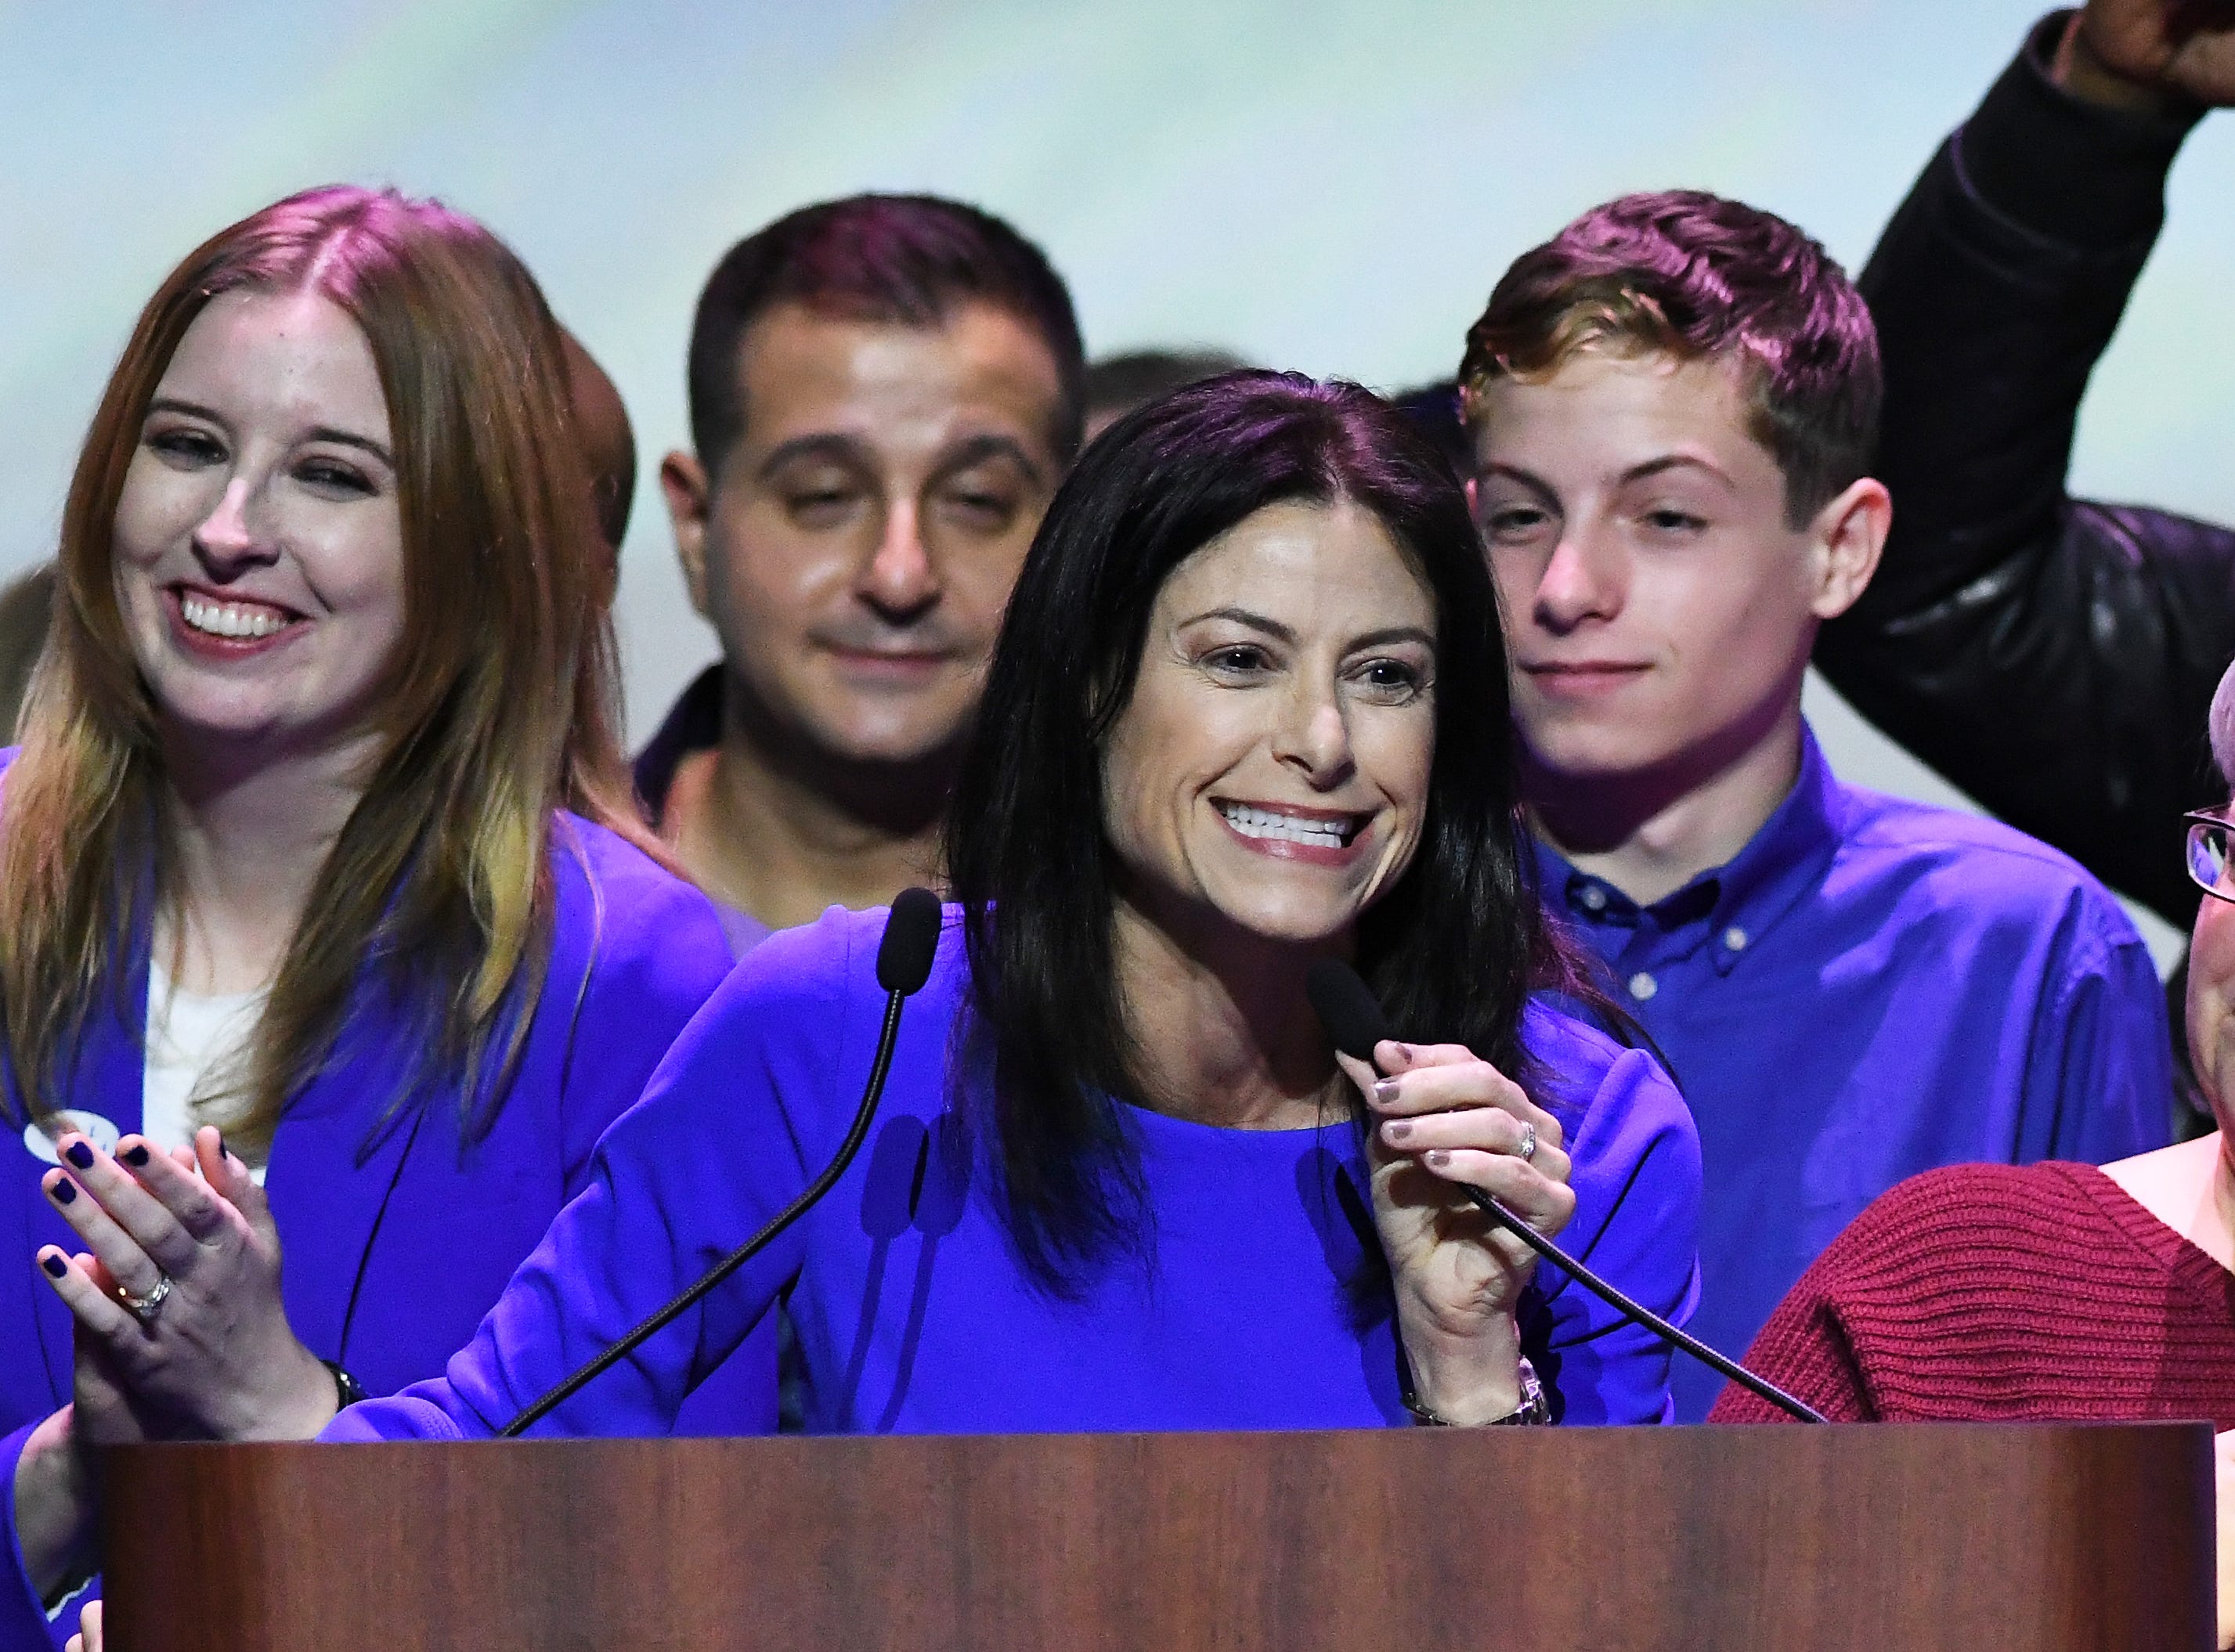 Michigan Attorney General candidate Dana Nessel thanks supporters at the Democrats' election night party in Detroit. At left is her wife,  Alanna Maguire